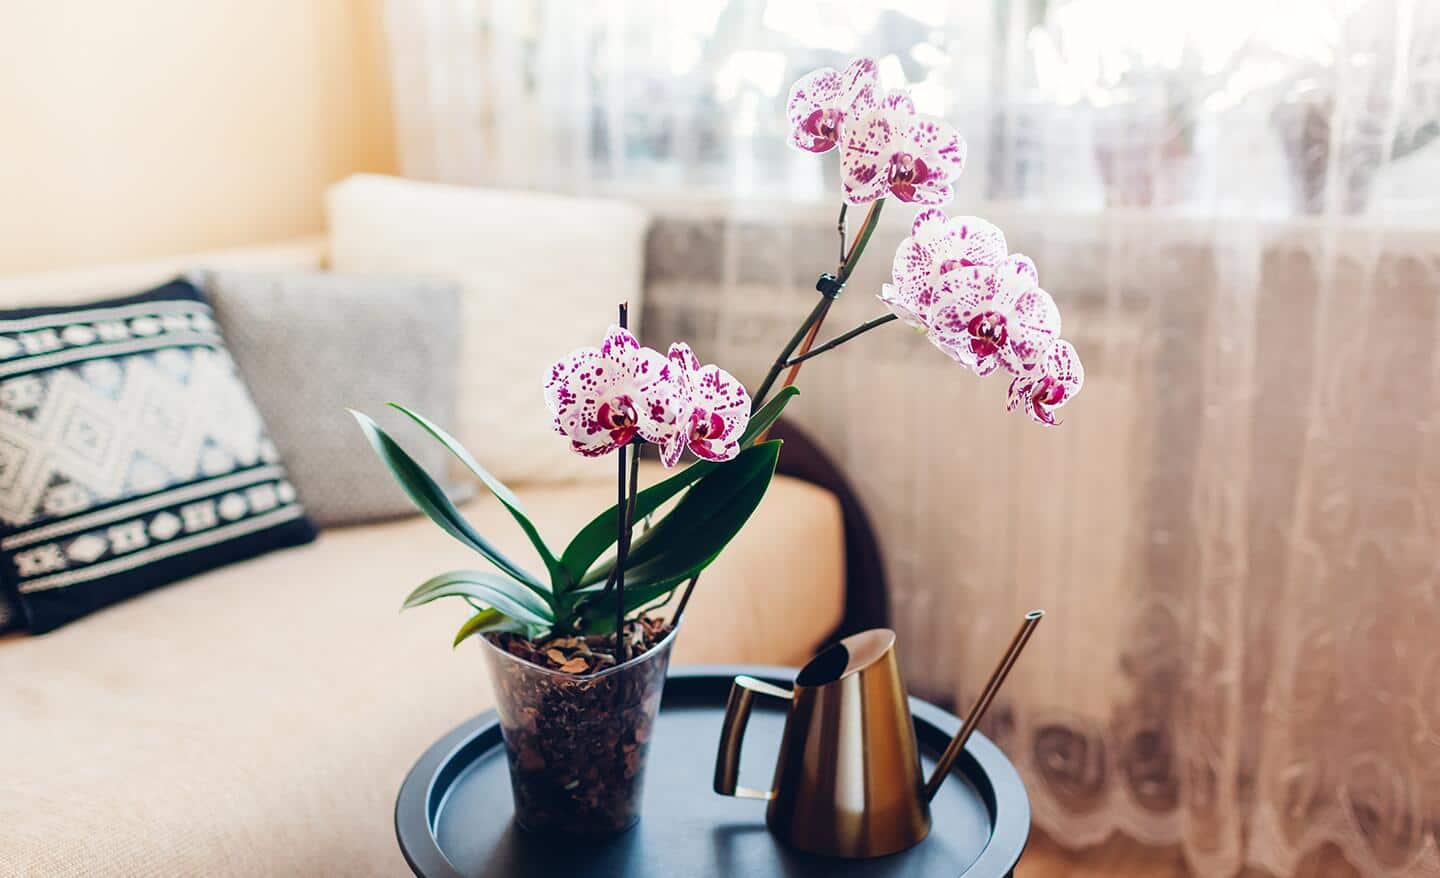 Orchid displayed on a table in a living area